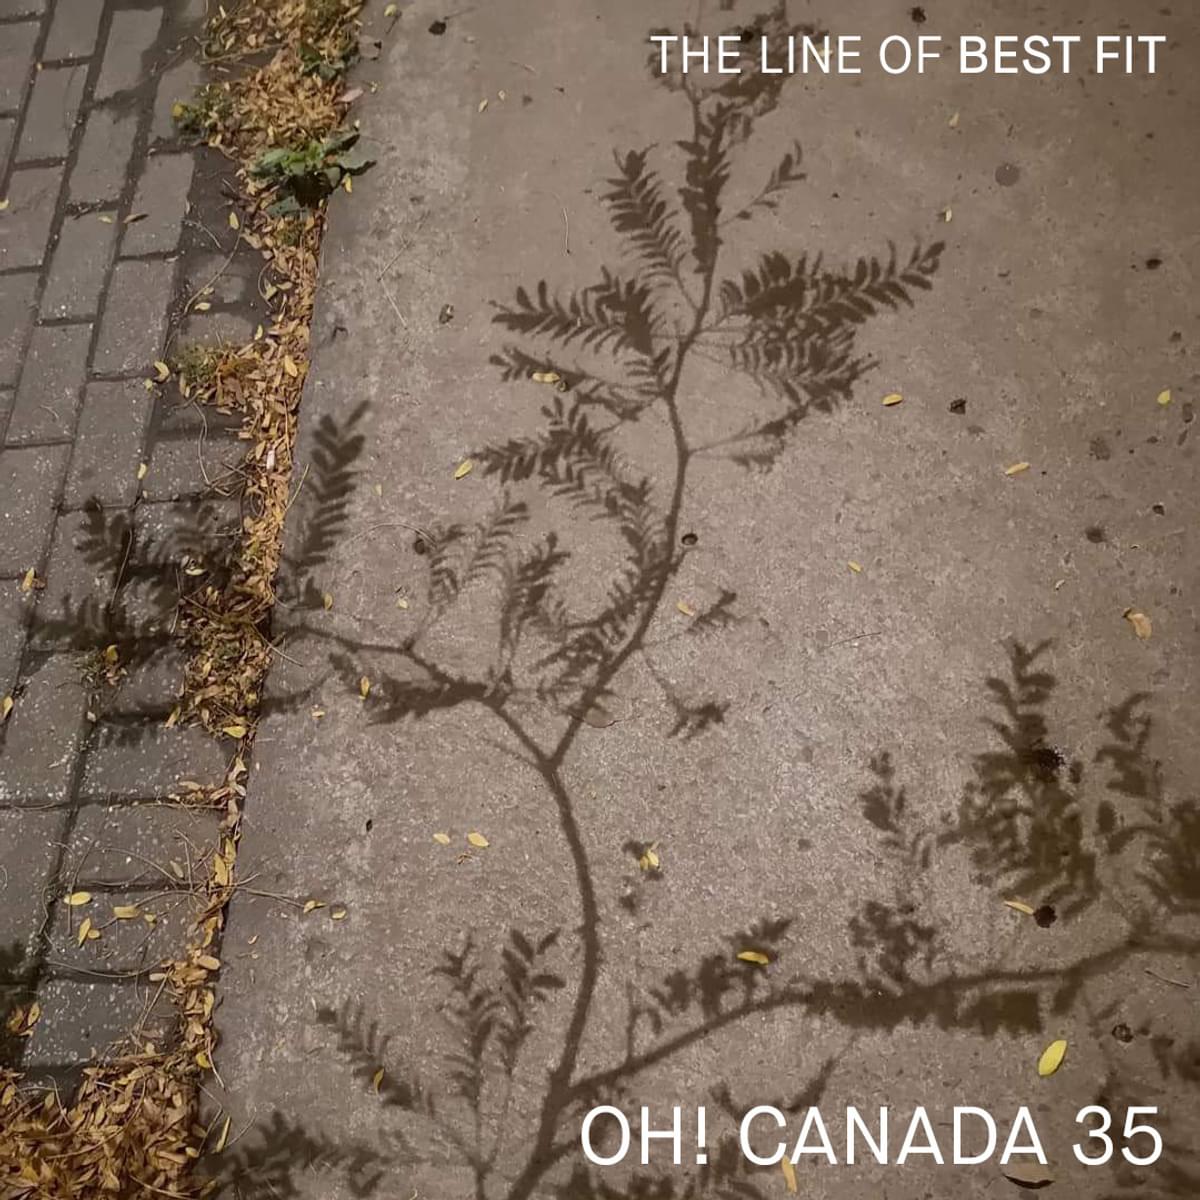 Oh canada 35